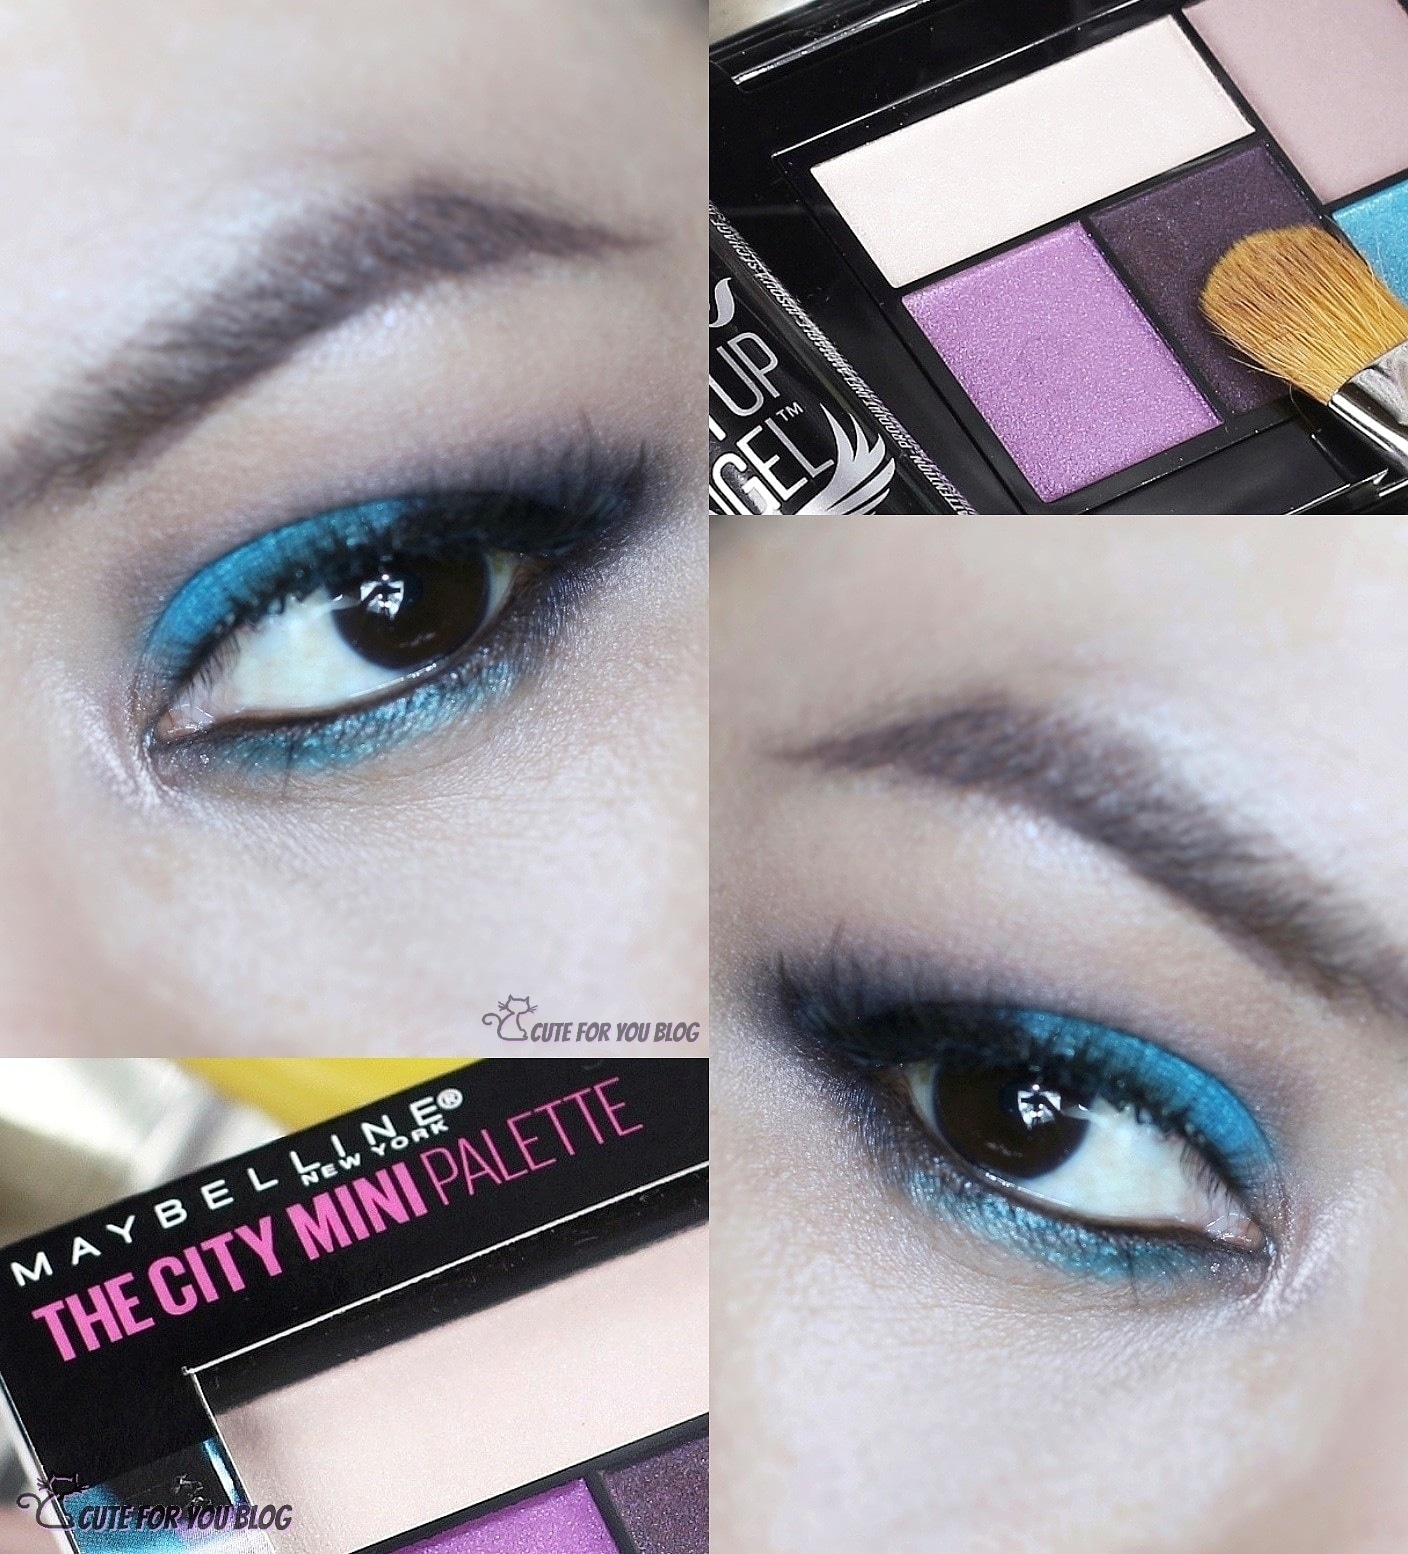 Maybelline Argentina, maybelline maquillaje, maybelline paletas, paleta maybelline, paleta de sombras maybelline, productos maybelline Argentina, reseñas maybelline, reseña paleta maybelline, the city mini palette maybelline, the city mini palette graffiti pop maybelline, sombras de ojos maybelline, Blogger Argentina, Blog de maquillaje argentina, beauty Blogger Argentina, cute for You Blog, karo_by_cuteforyou_blog, Karolina Luke Blog, maybellinearg, maybelline New York Argentina, the falsies Push Up Angel, swatches maybelline, swatches the city mini palette graffiti pop